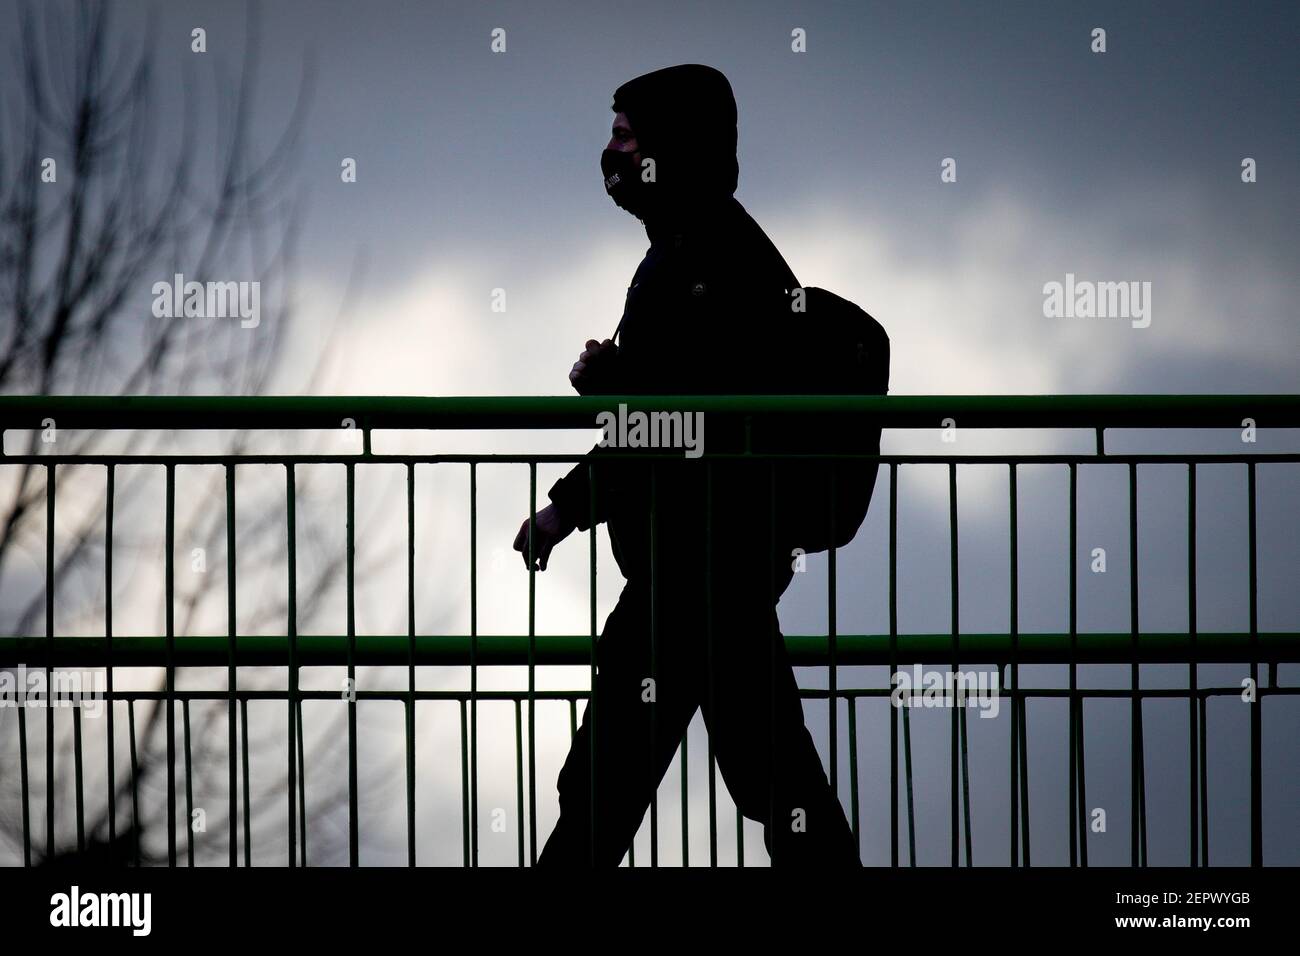 (210228) -- WARSAW, Feb. 28, 2021 (Xinhua) -- A man wearing a face mask is seen crossing a bridge in Warsaw, Poland, on Feb. 27, 2021. The Polish government announced new restrictions on Wednesday in an effort to curb a recent rise in new COVID-19 infections officially dubbed the 'third wave.' Health Minister Adam Niedzielski said that the rules on face covering will be tightened, mandating the use of masks in public spaces starting on Saturday instead of the previously allowed alternatives, such as scarfs and visors. Also starting on Saturday, travelers from southern neighbours Slovakia Stock Photo